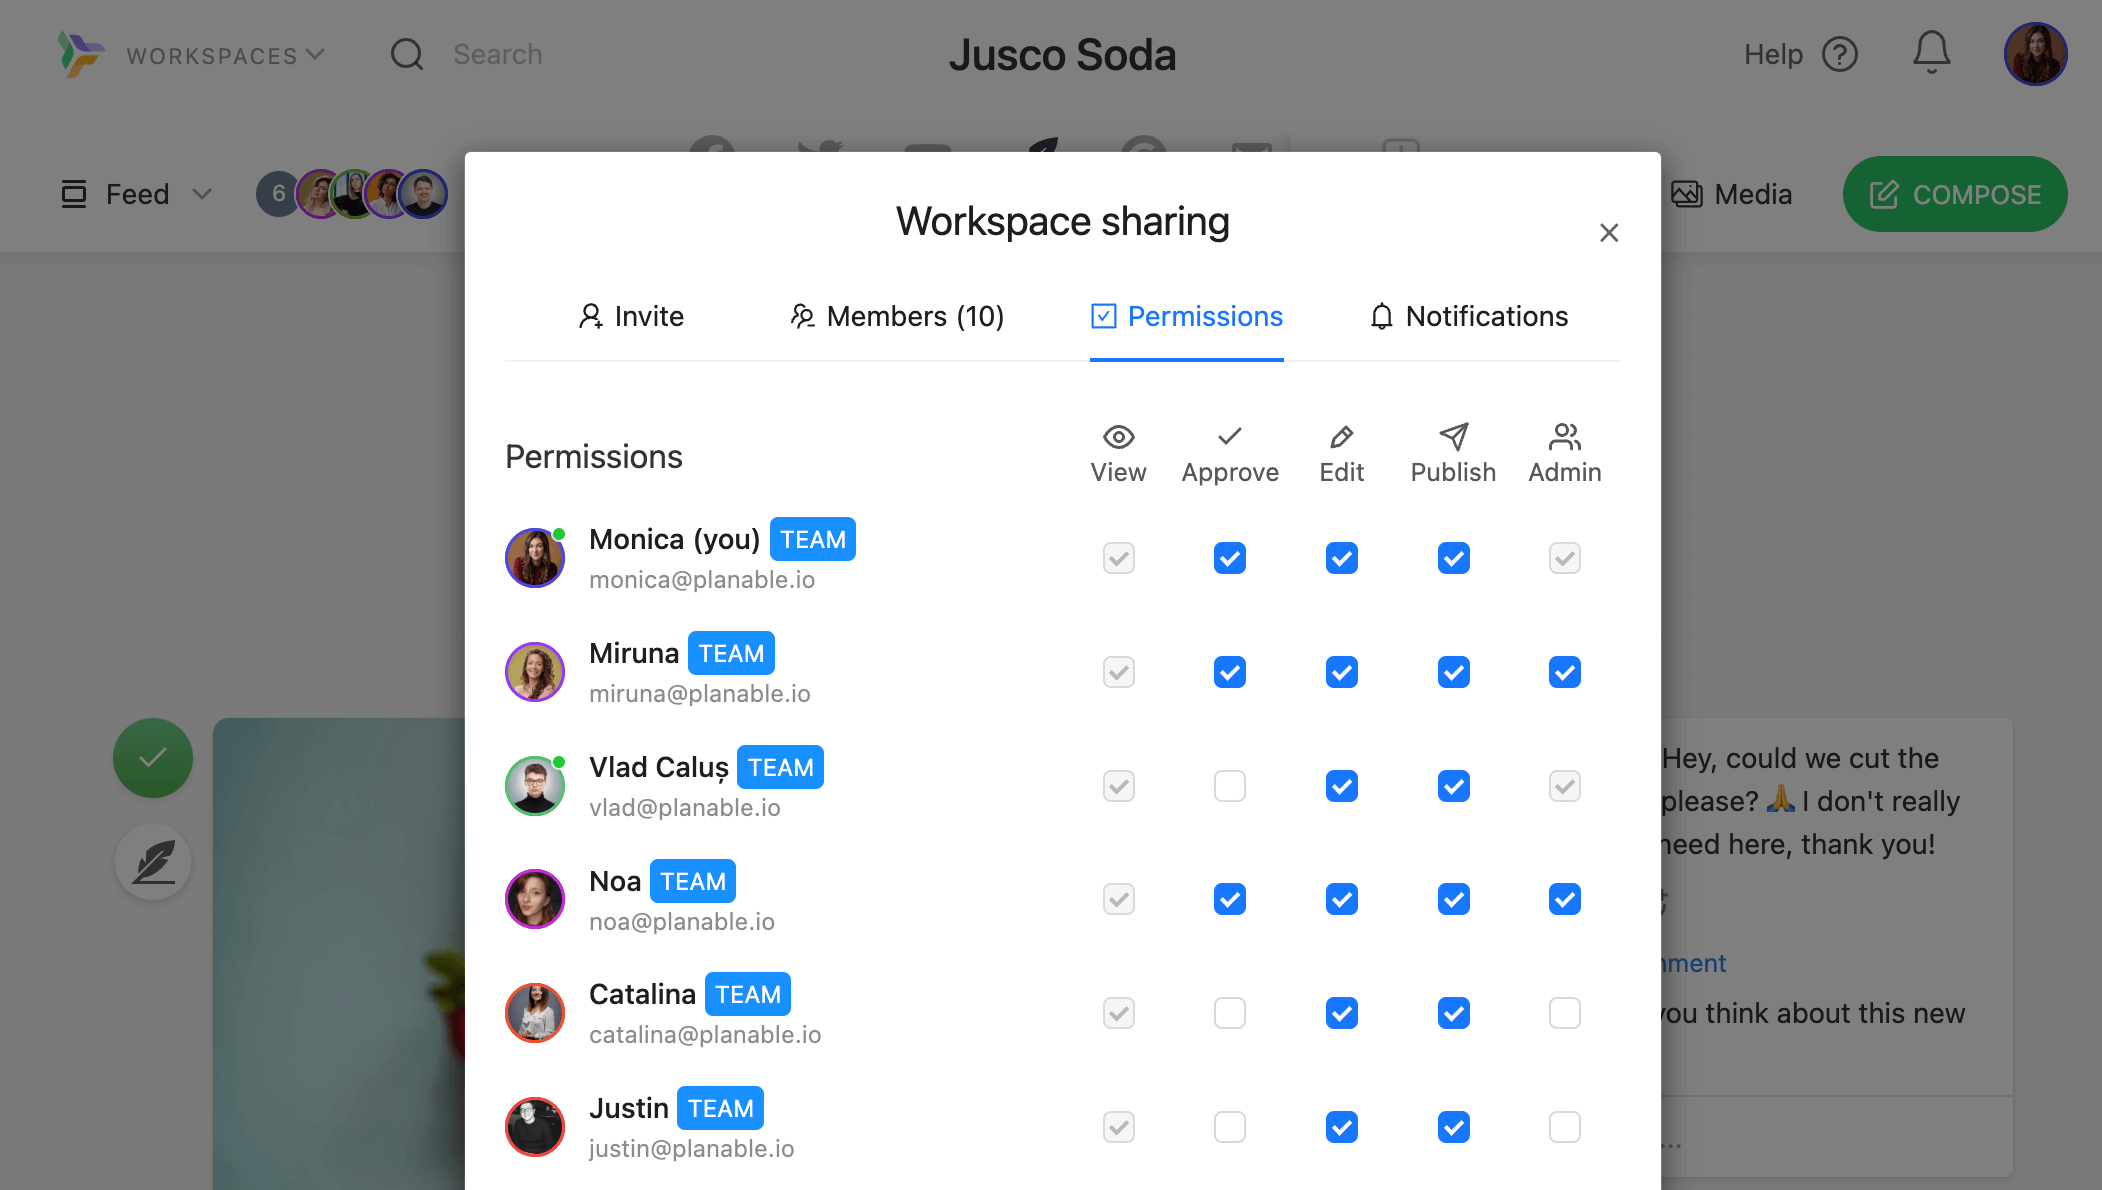 permissions for multiple team members including content view, approve, edit, publish, and admin